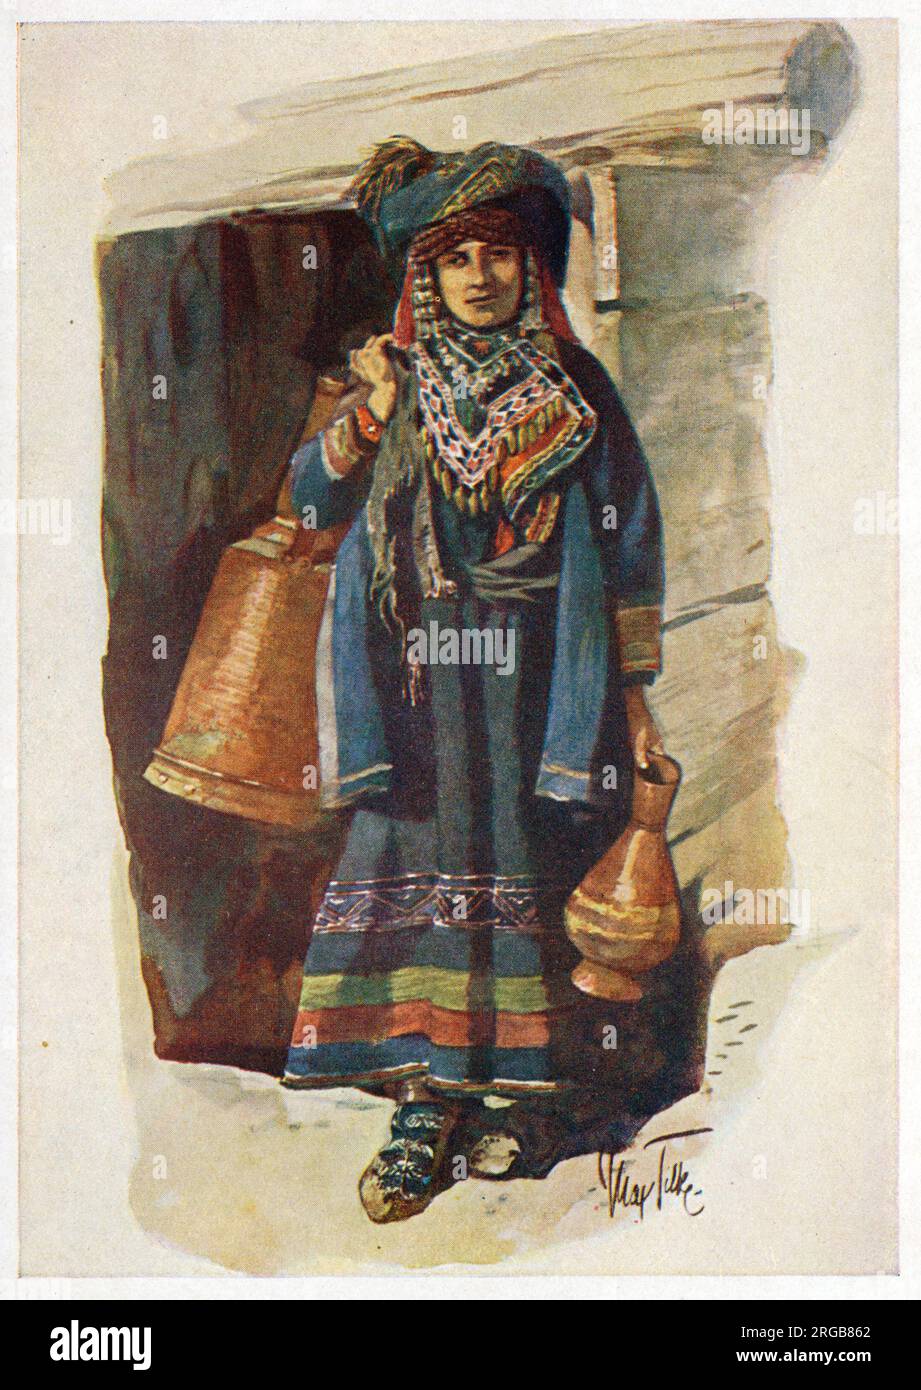 People of the Caucasus series by Max Karl Tilke - Khevsur woman from Georgia (based heavily on a photograph by D A Nikitin of 1881). Stock Photo